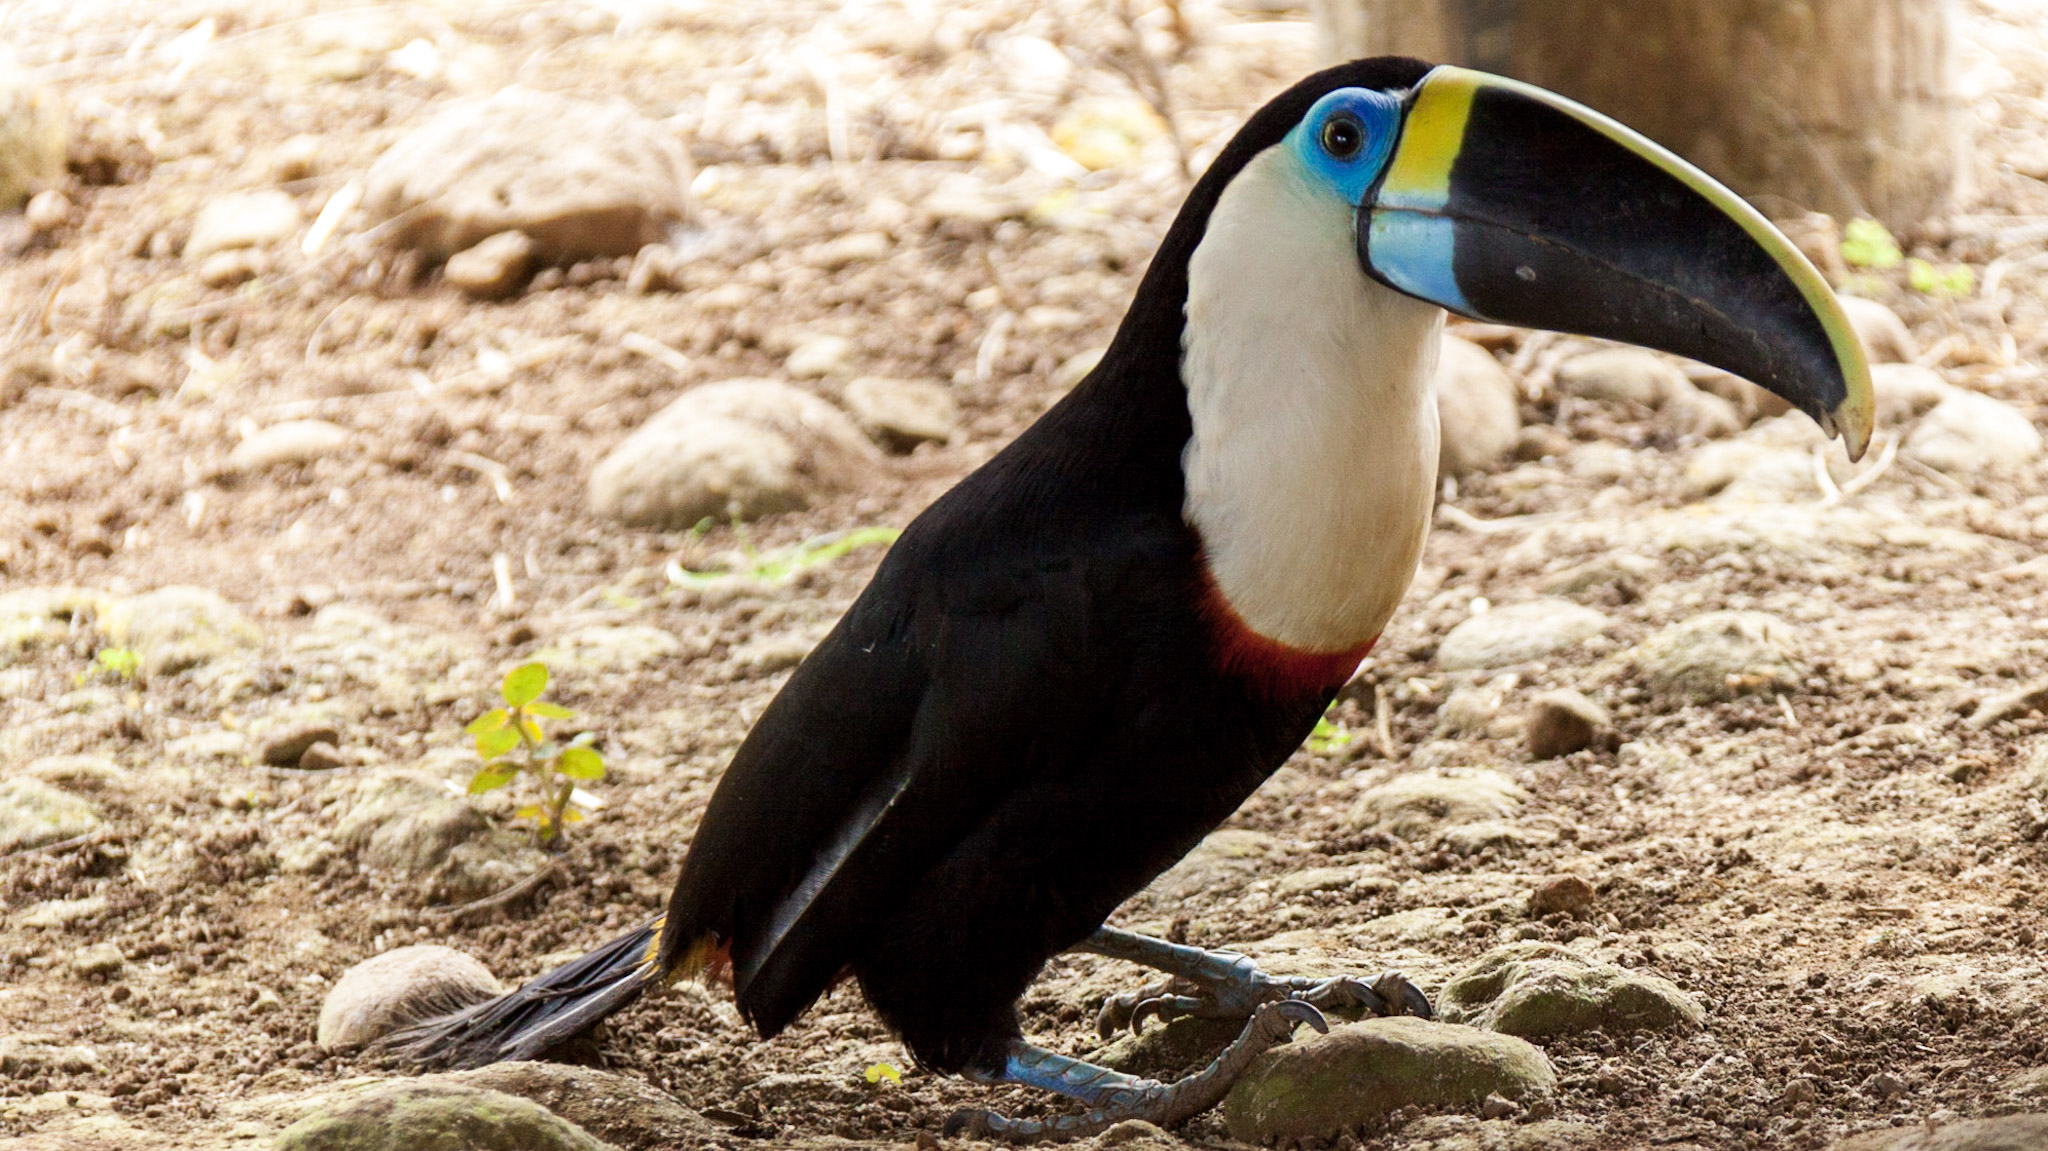 A toucan in the Amazon